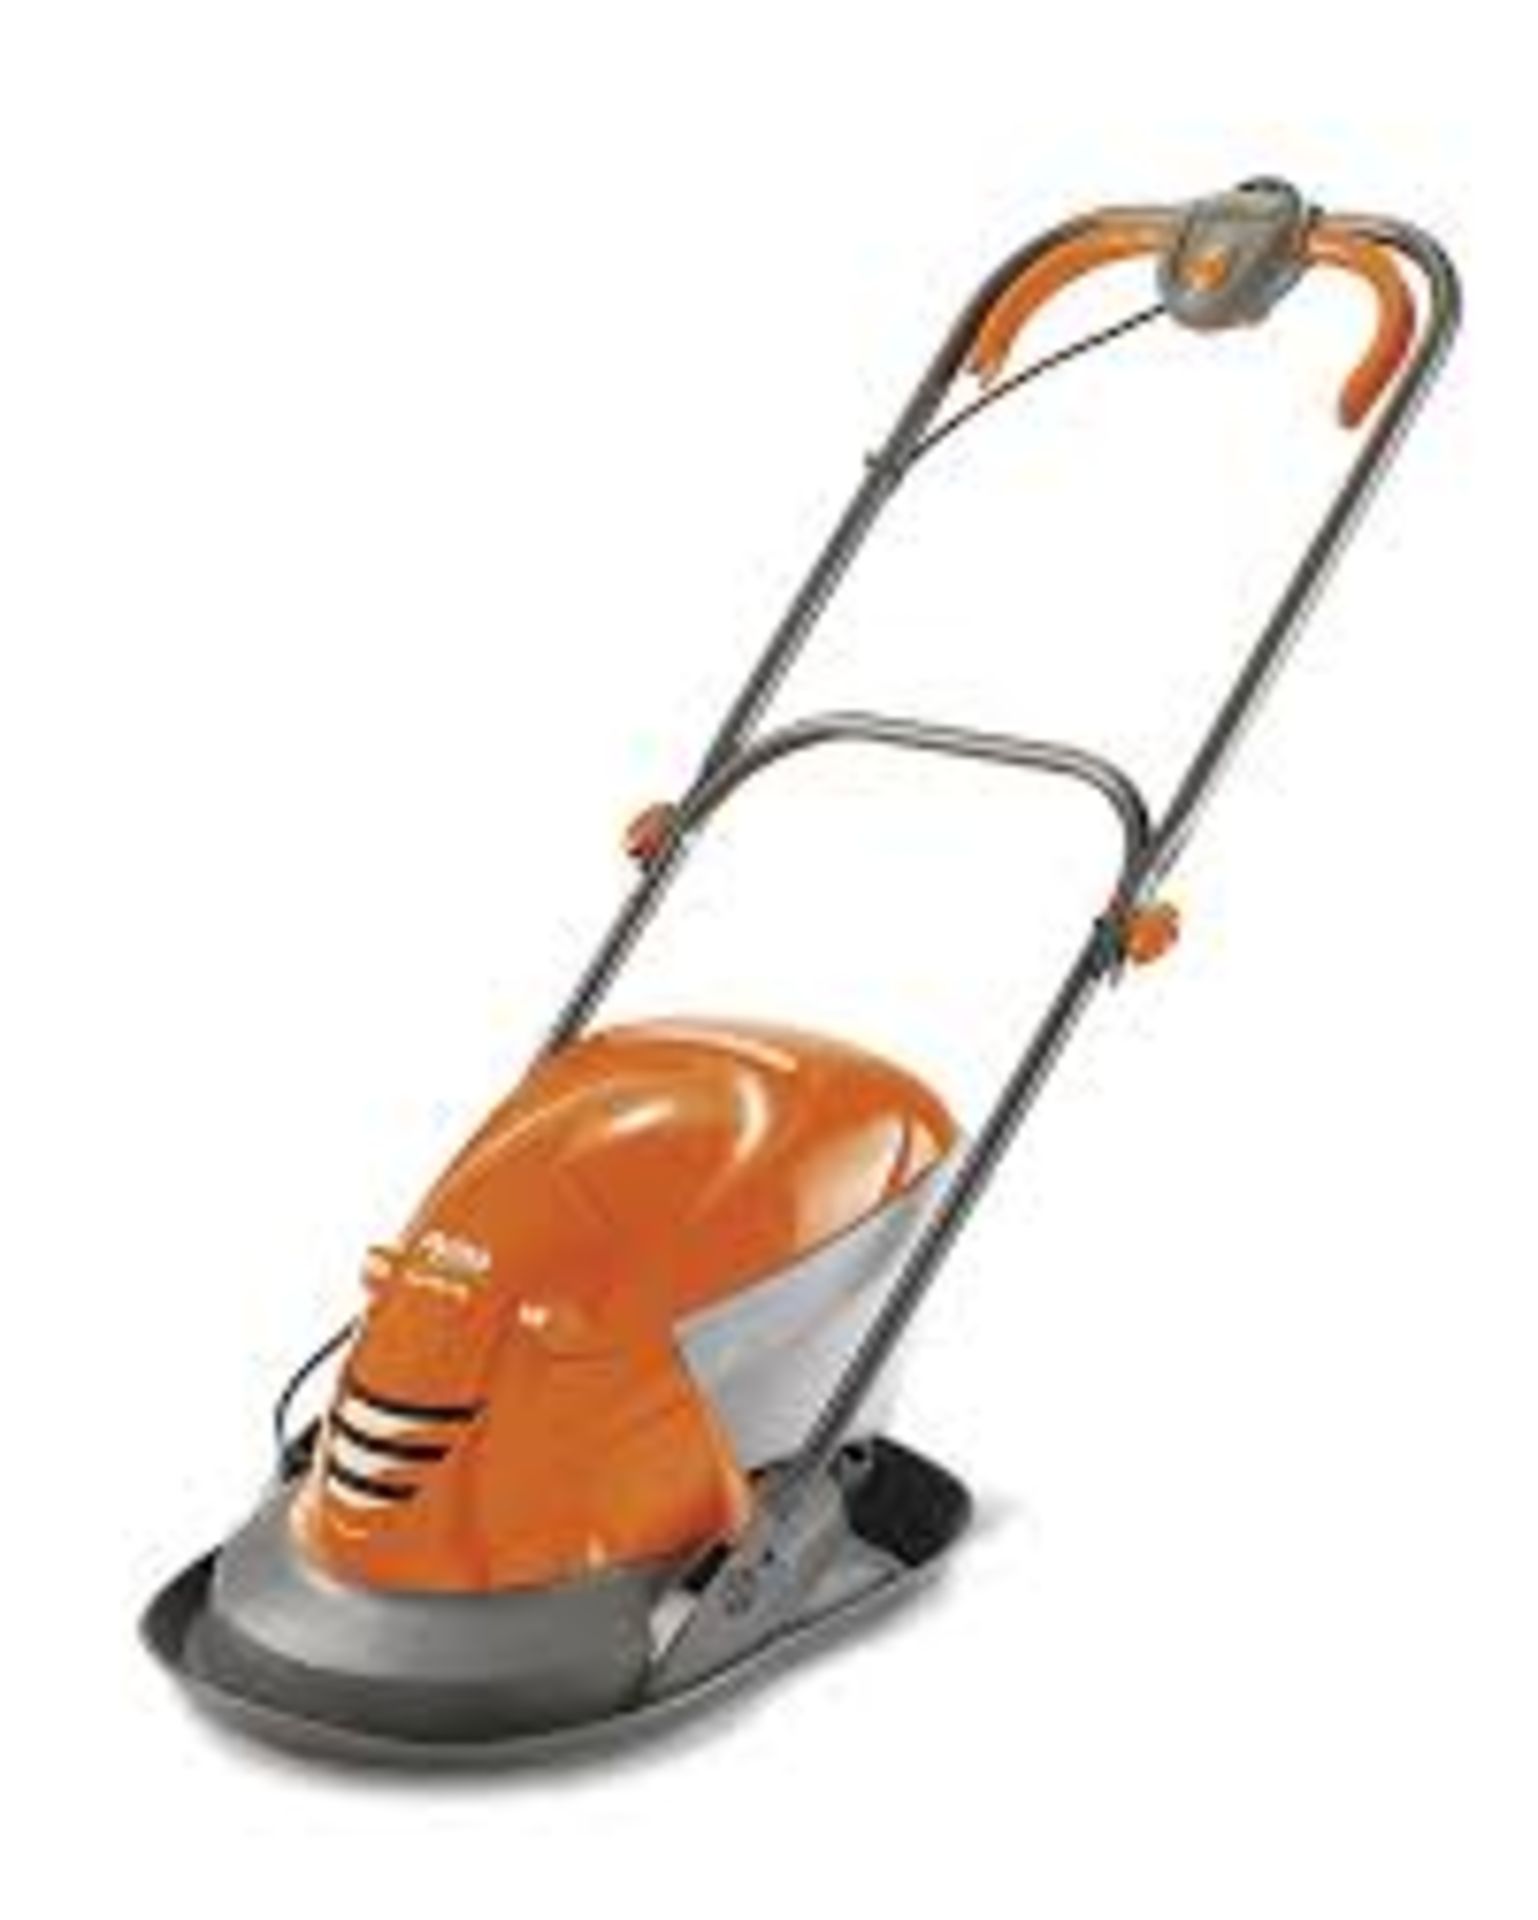 Flymo Hover Vac 270 Corded Hover Lawnmower. -S2.8. This lightweight hover mower vac glides across